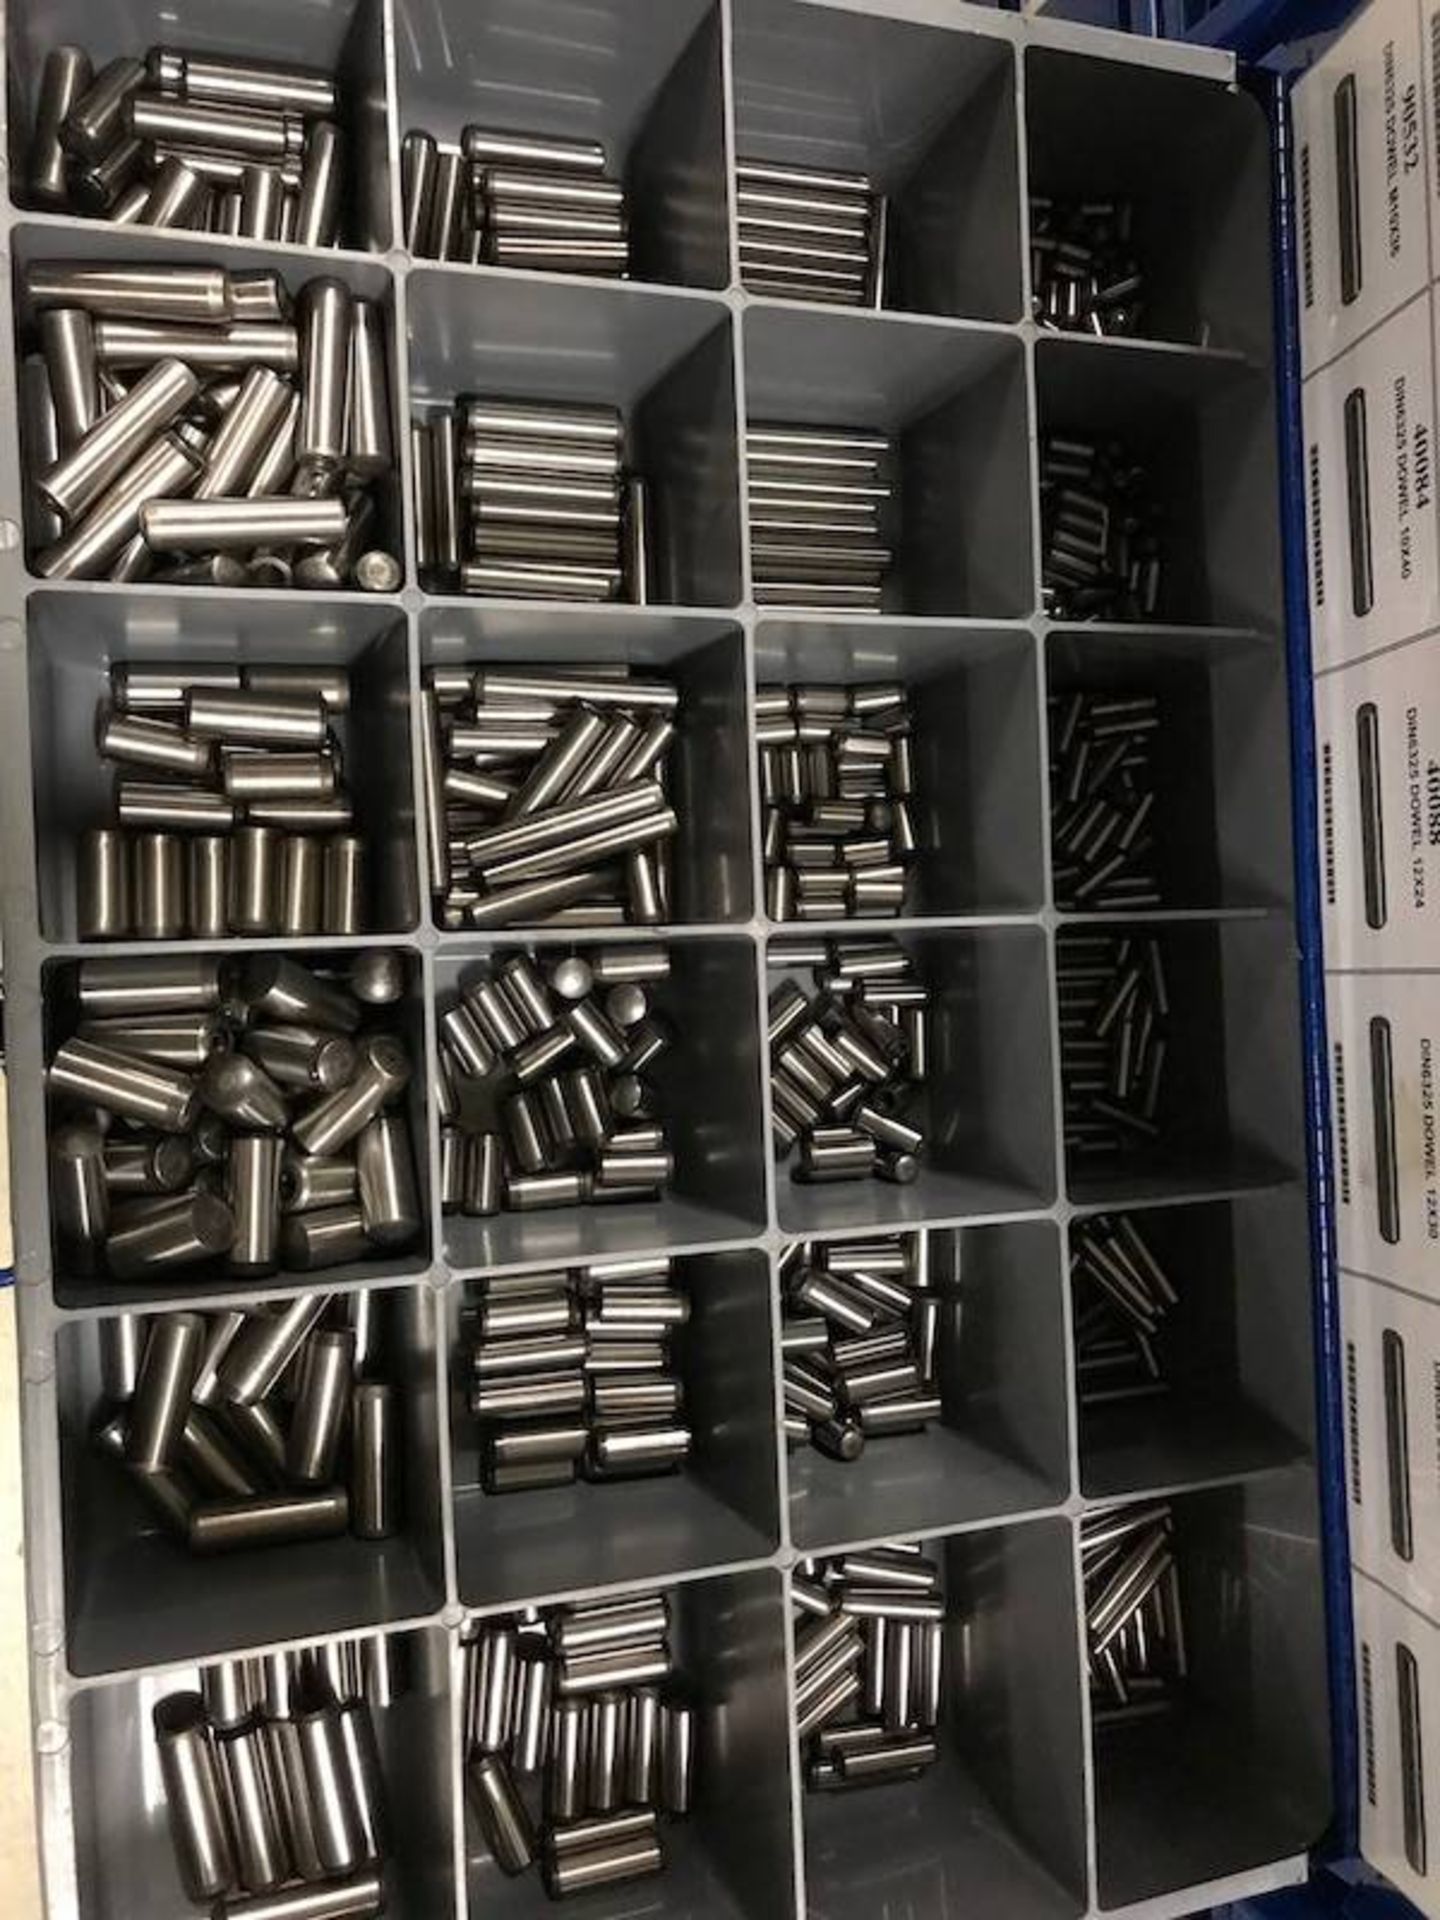 Contents of Fastenal Parts Bins - Image 41 of 70